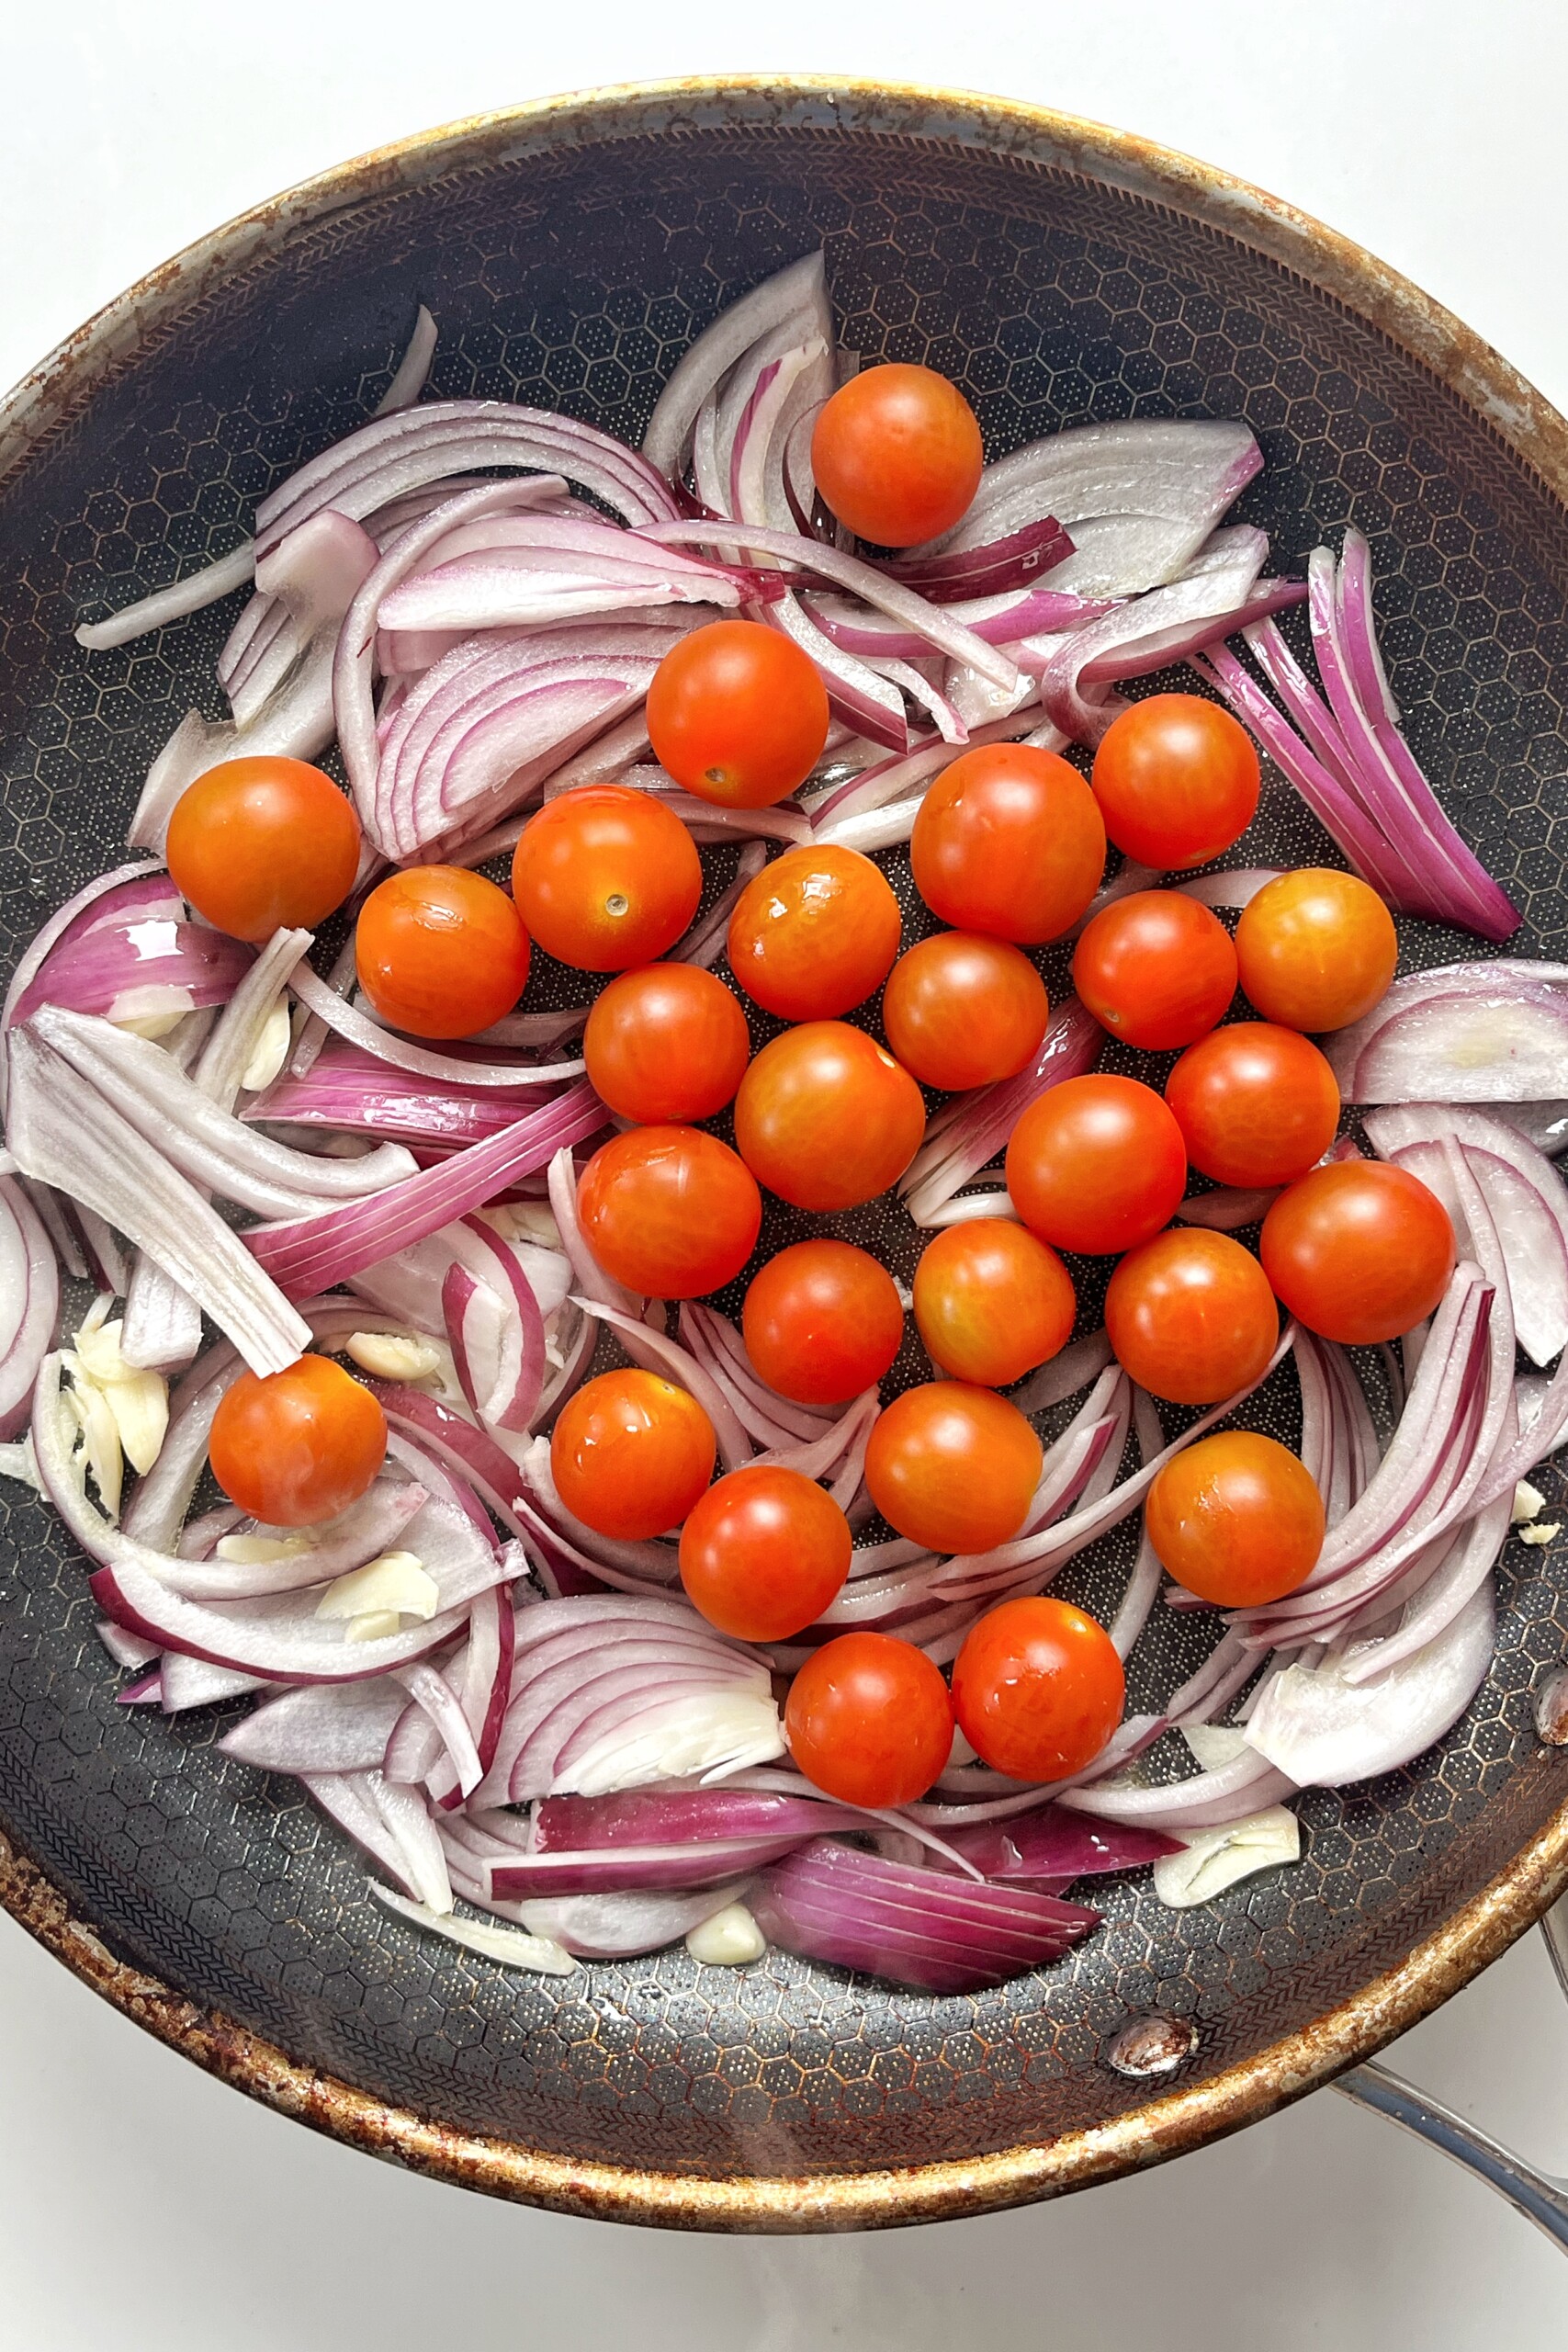 Tomatoes, red onion, and garlic frying in a pan.